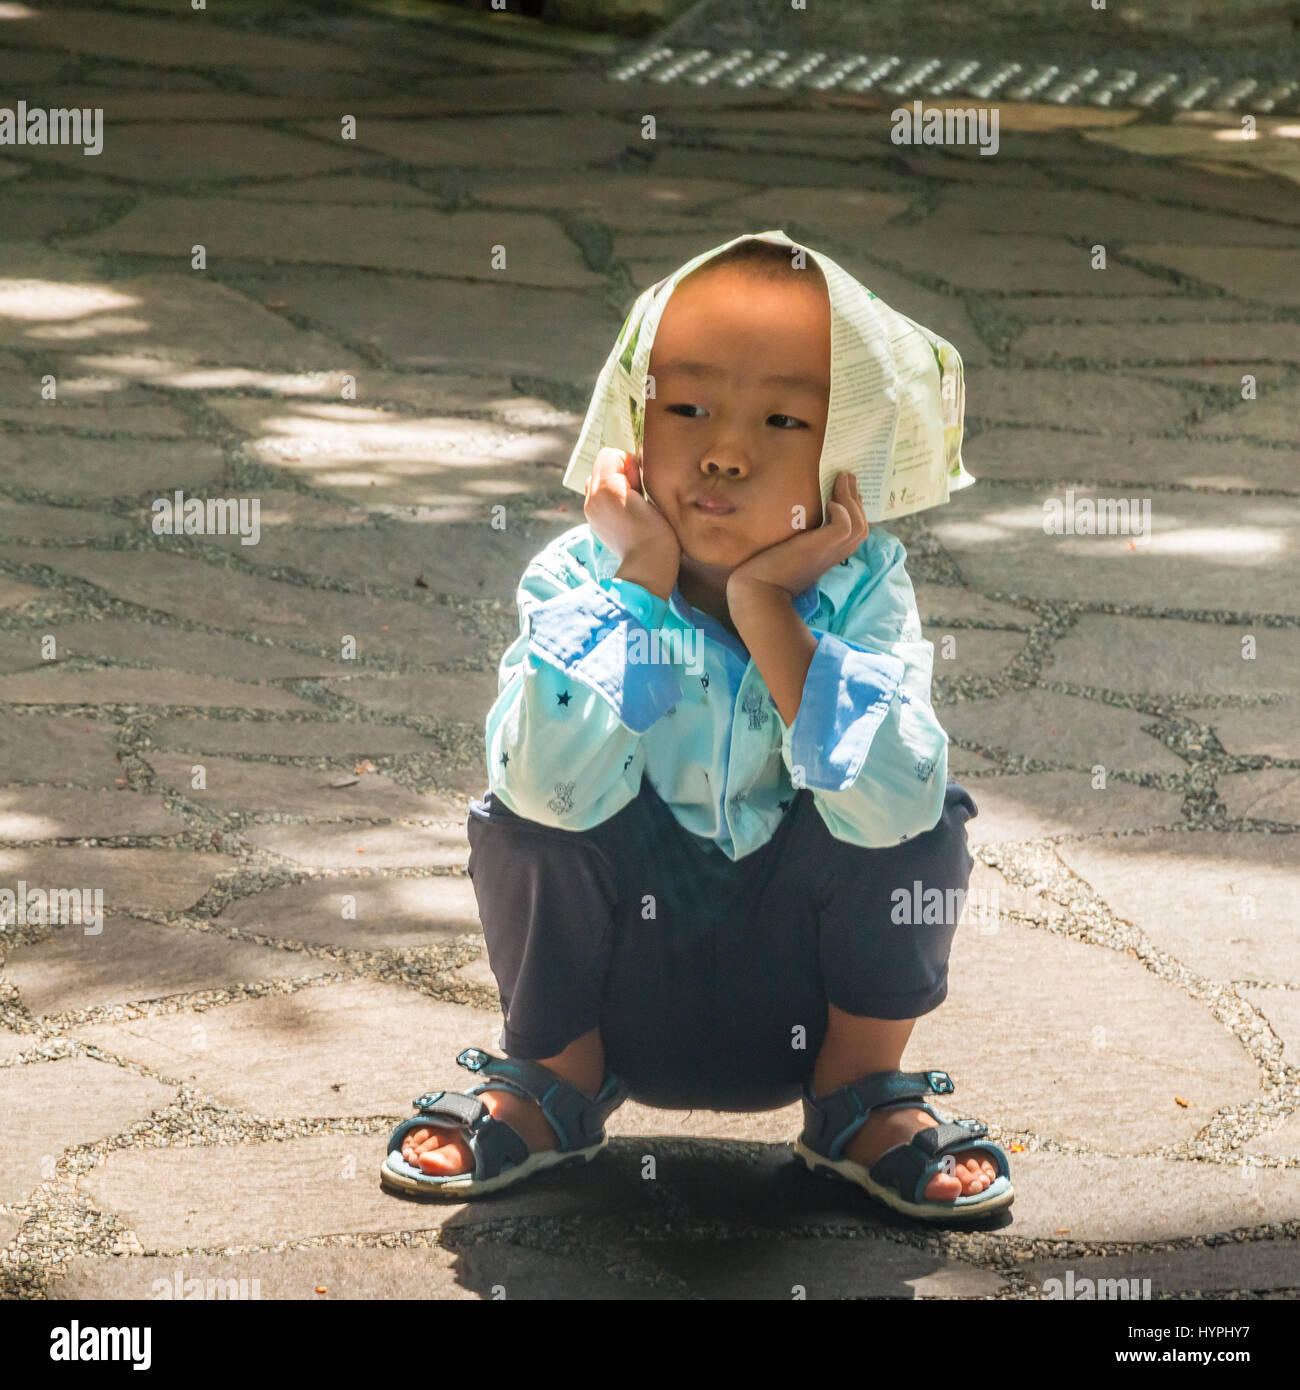 Playful young Chinese boy sitting on a path wearing newspaper hat Stock Photo